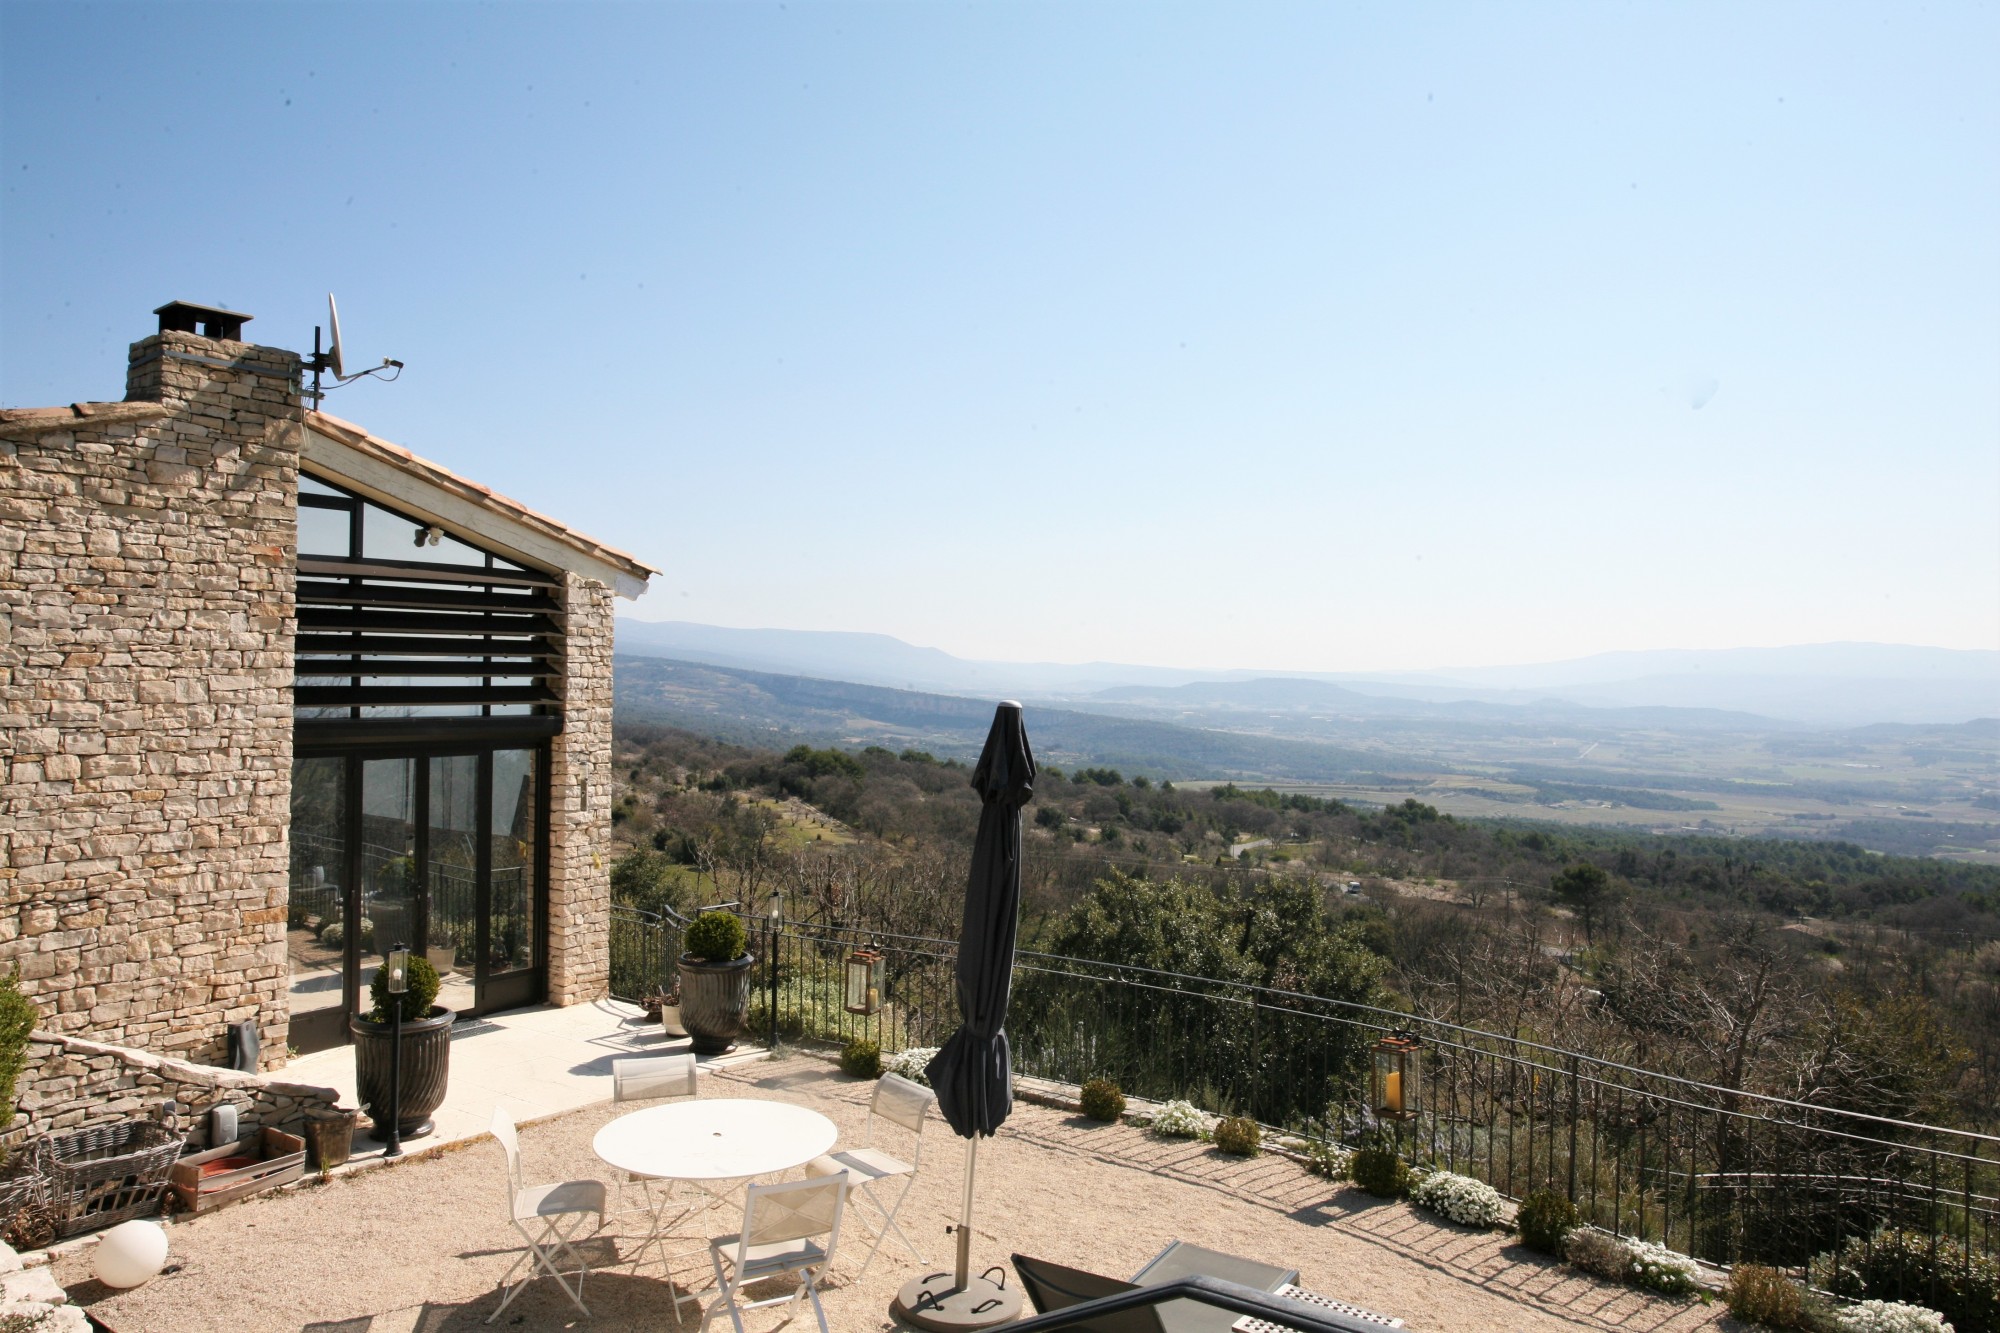 For seasonral rental in Murs, beautiful stone house with stunning views over the Luberon